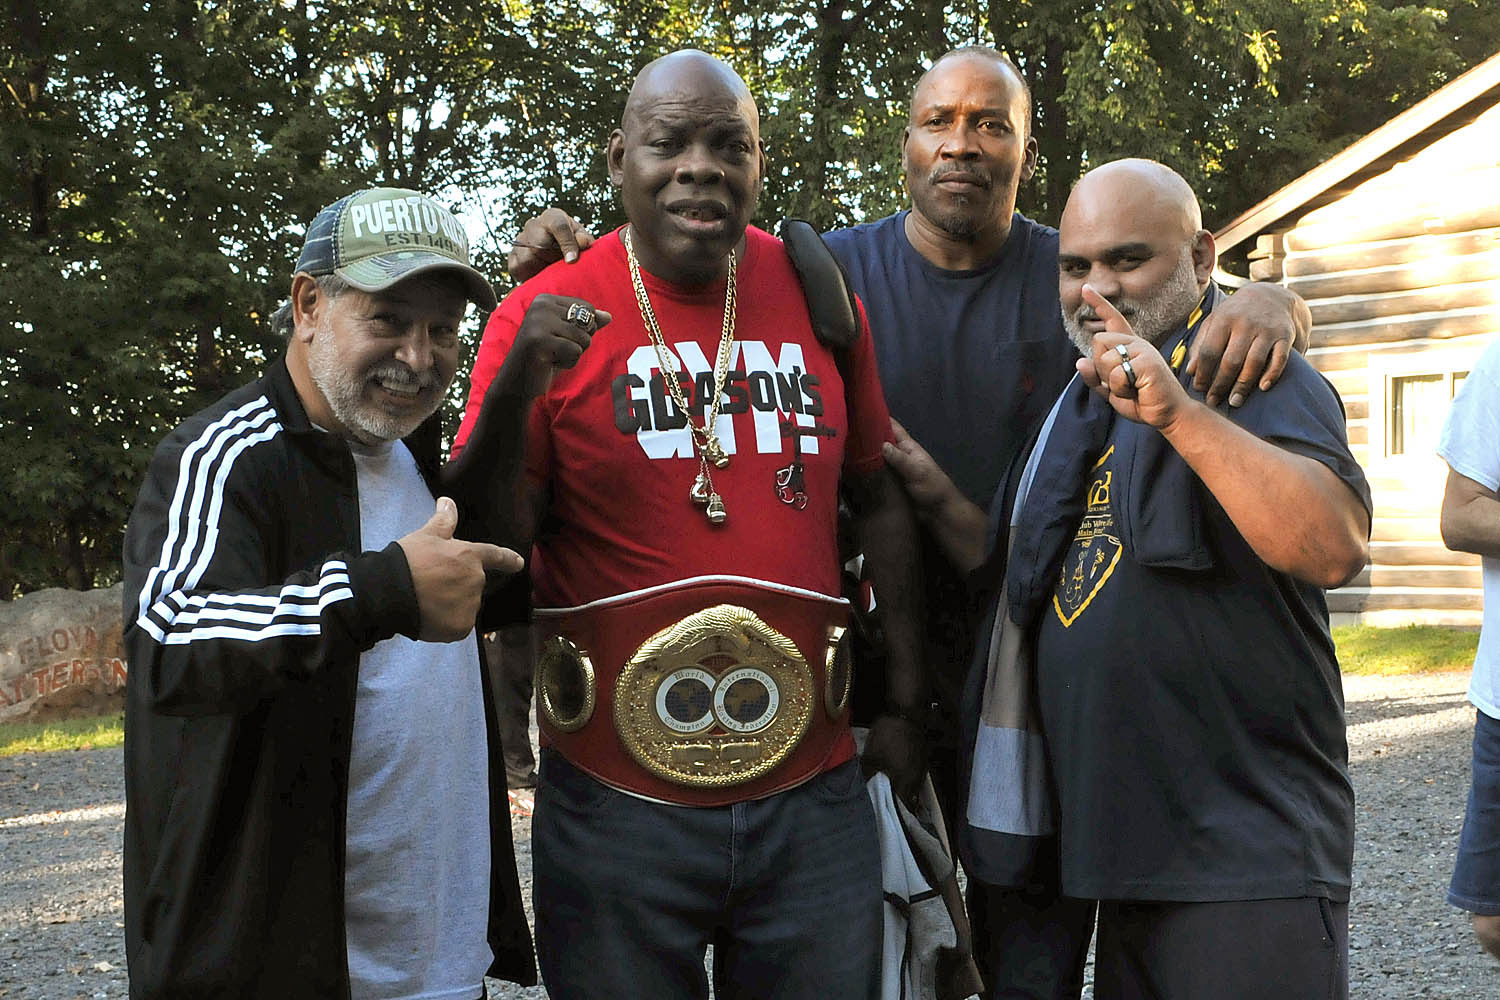 Boxing Reunion & Cookout with “Iceman” John Scully